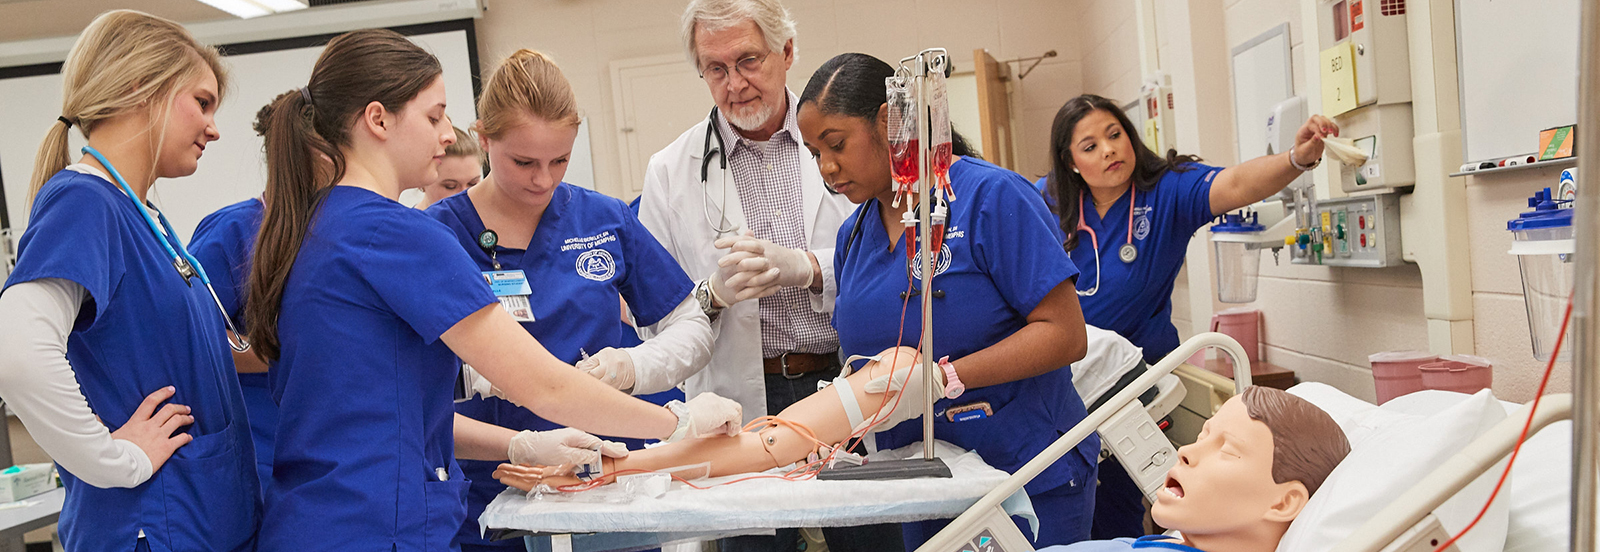 Seven Nursing Students and an Instructor go through a clinical practice procedure with a test dummy.